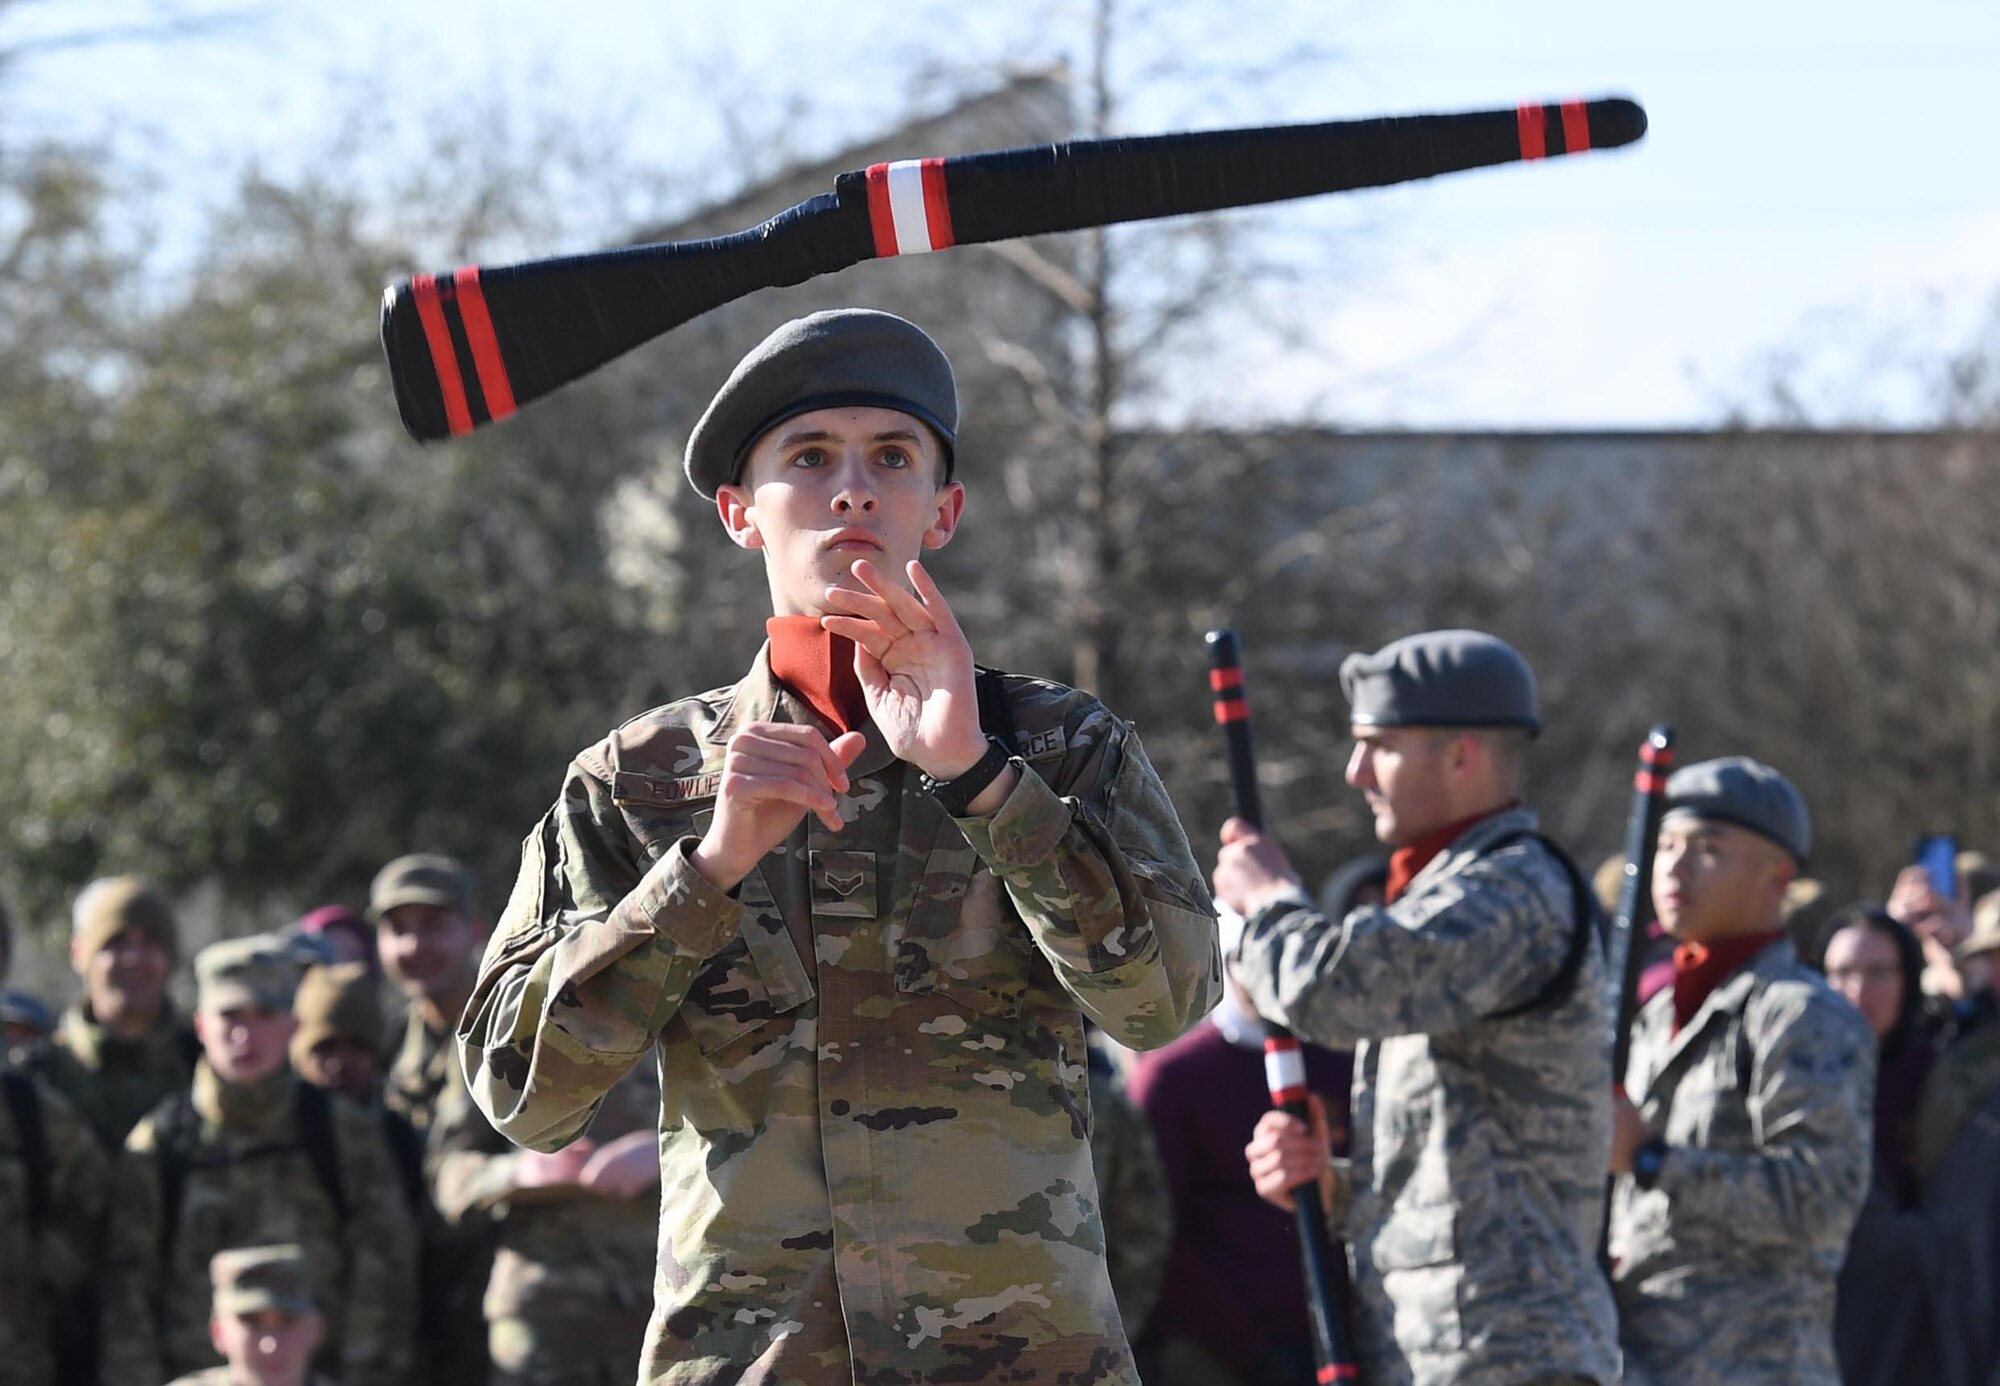 U.S. Air Force Airman 1st Class Ethan Fowler, 335th Training Squadron freestyle drill team member, spins a rifle during the 81st Training Group drill down on the Levitow Training Support Facility drill pad at Keesler Air Force Base, Mississippi, Feb. 21, 2020. Airmen from the 81st TRG competed in a quarterly open ranks inspection, regulation drill routine and freestyle drill routine. Keesler trains more than 30,000 students each year. While in training, Airmen are given the opportunity to volunteer to learn and execute drill down routines. (U.S. Air Force photo by Kemberly Groue)